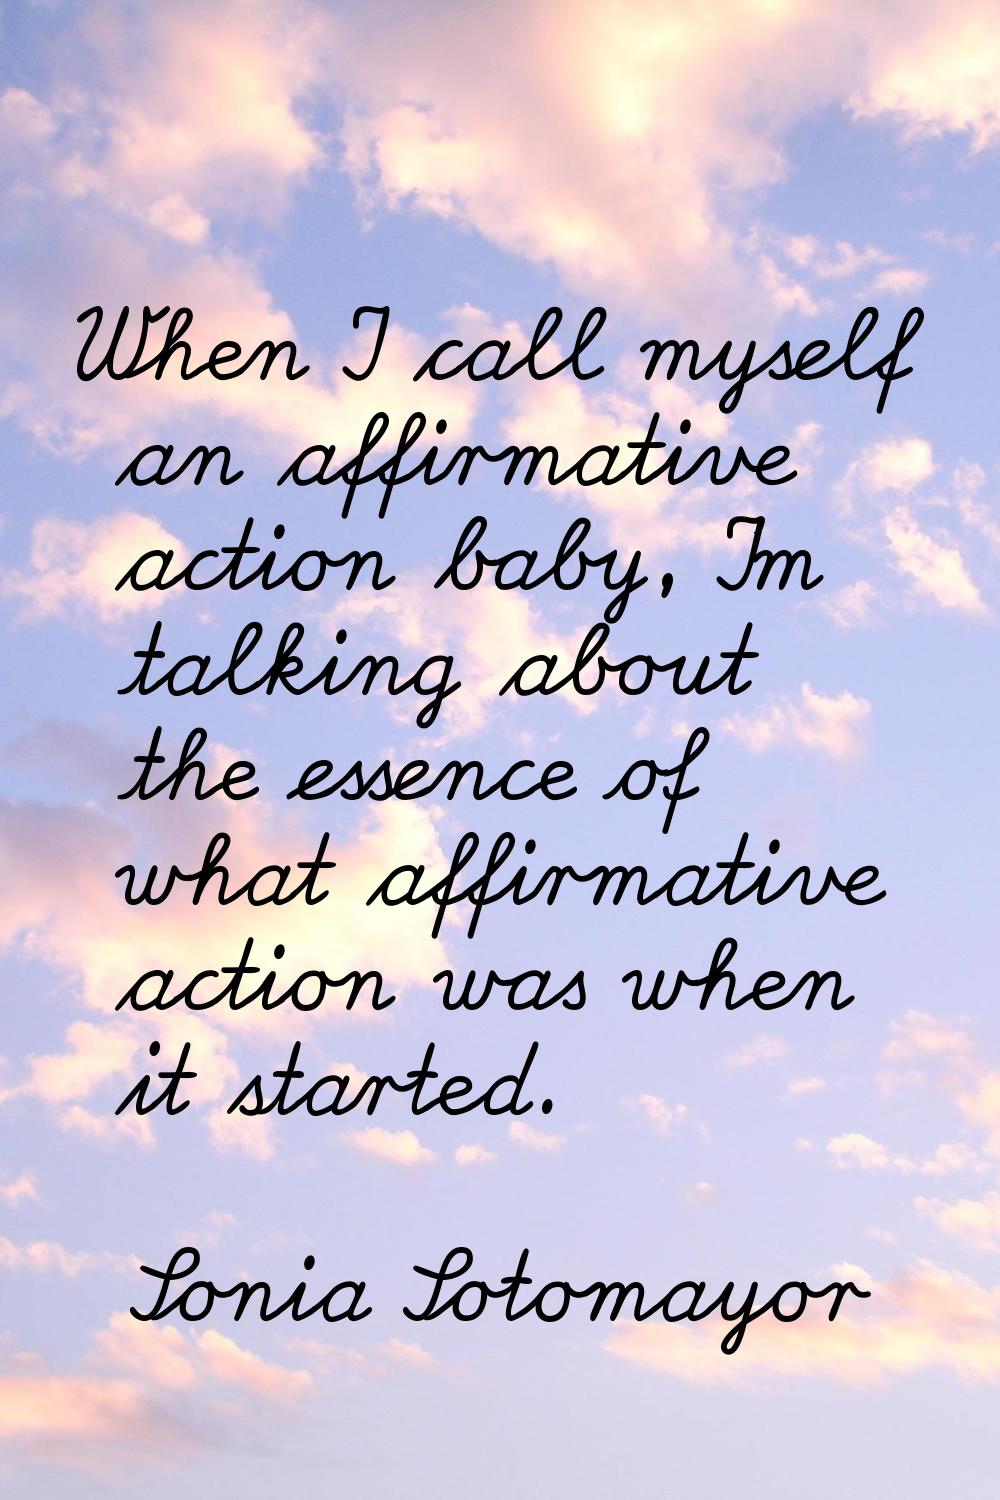 When I call myself an affirmative action baby, I'm talking about the essence of what affirmative ac